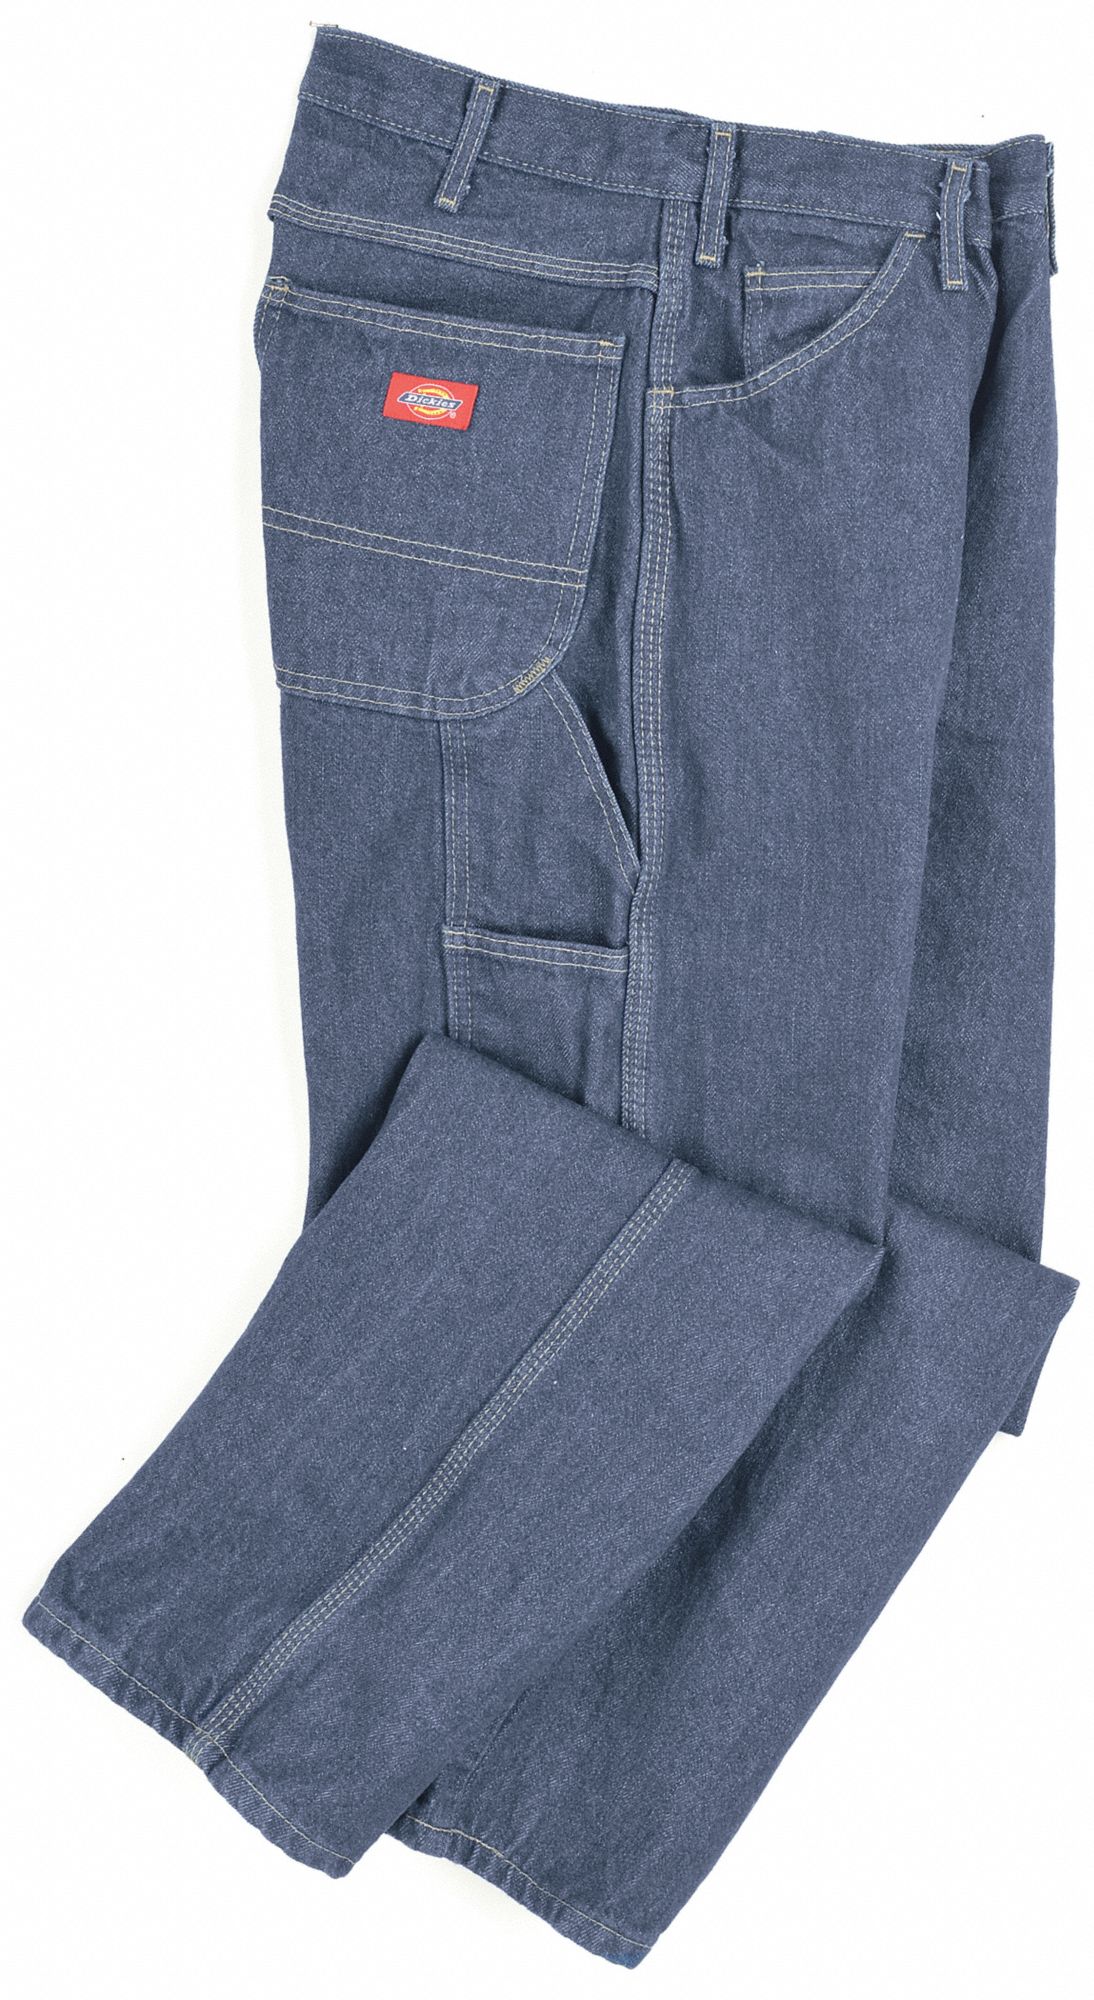 32 x 30 jeans